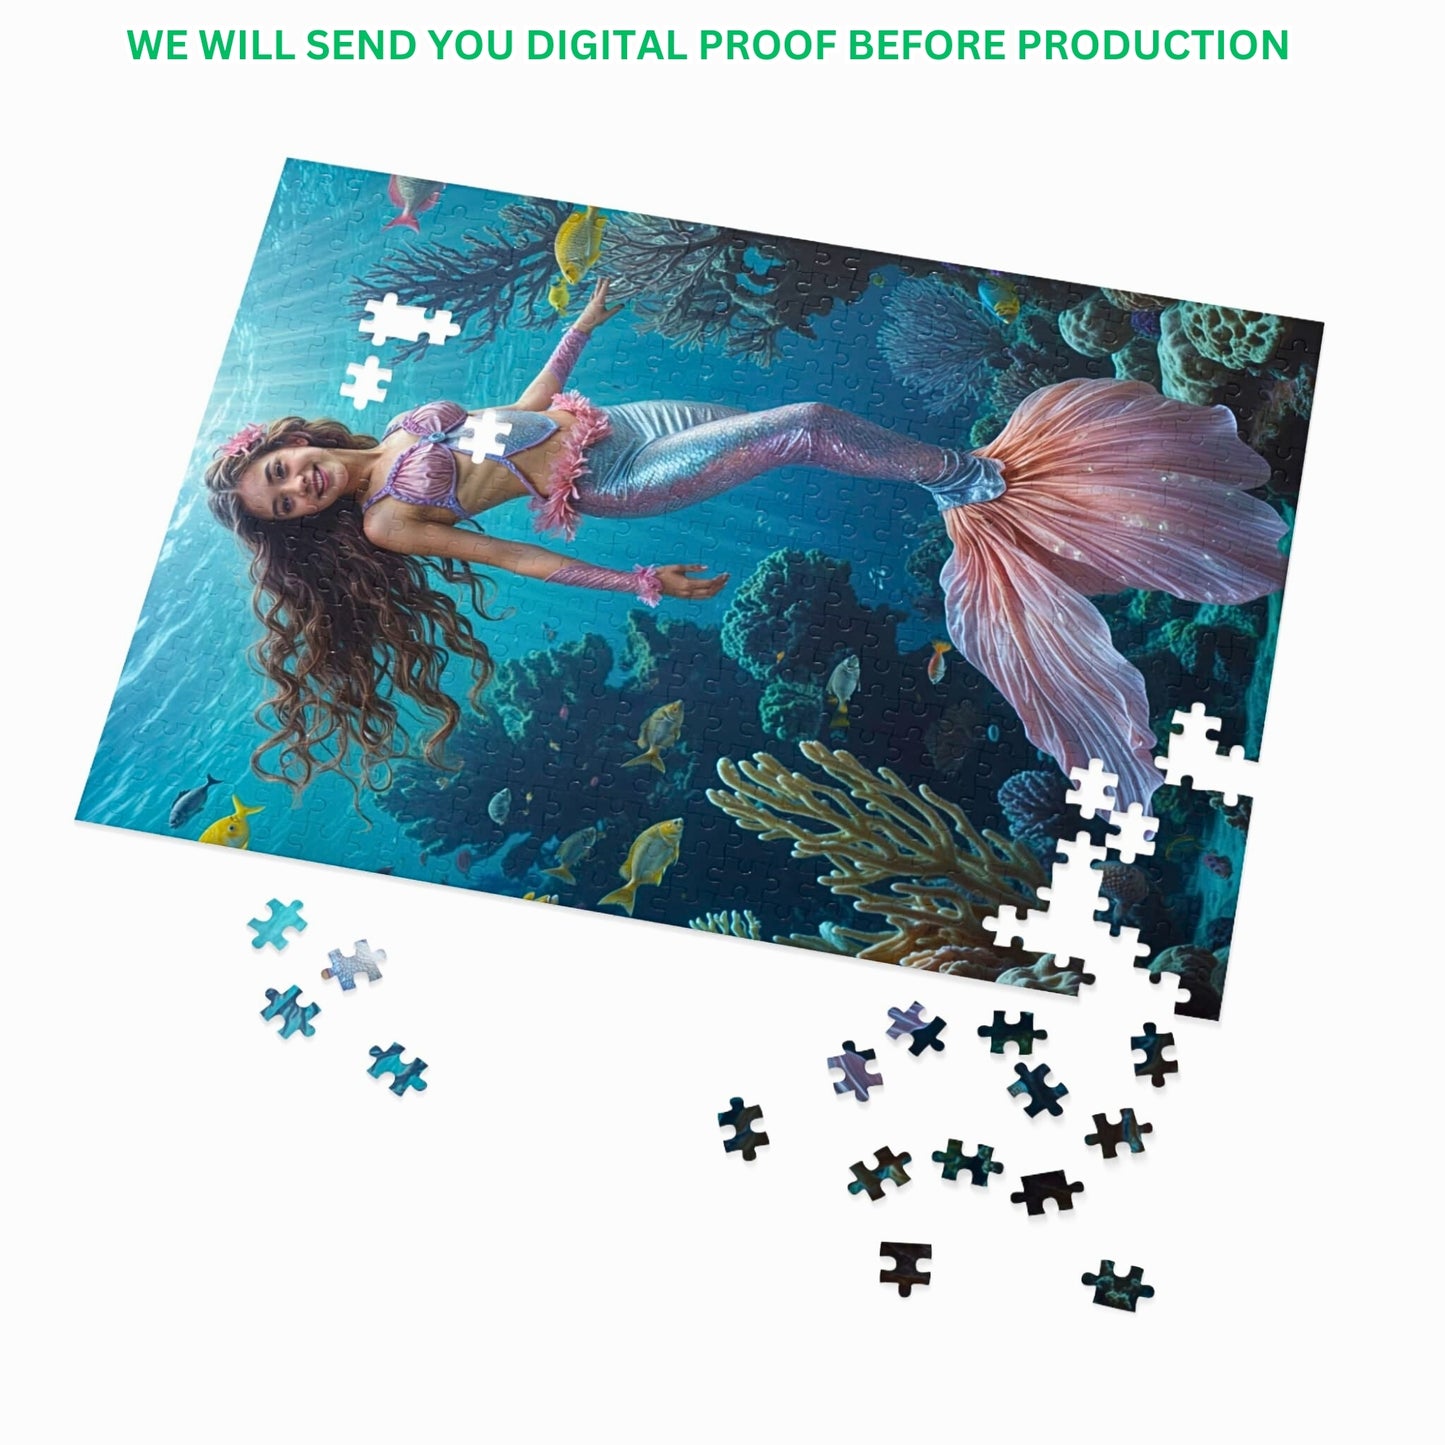 Make Waves with Our Custom Mermaid Puzzle from Photo! Transform Your Favorite Image into a Personalized Little Mermaid Puzzle. A Magical Princess Portrait Gift for Any Occasion. Available in Sizes from 250 to 1000 Pieces. Dive into Fun Today!